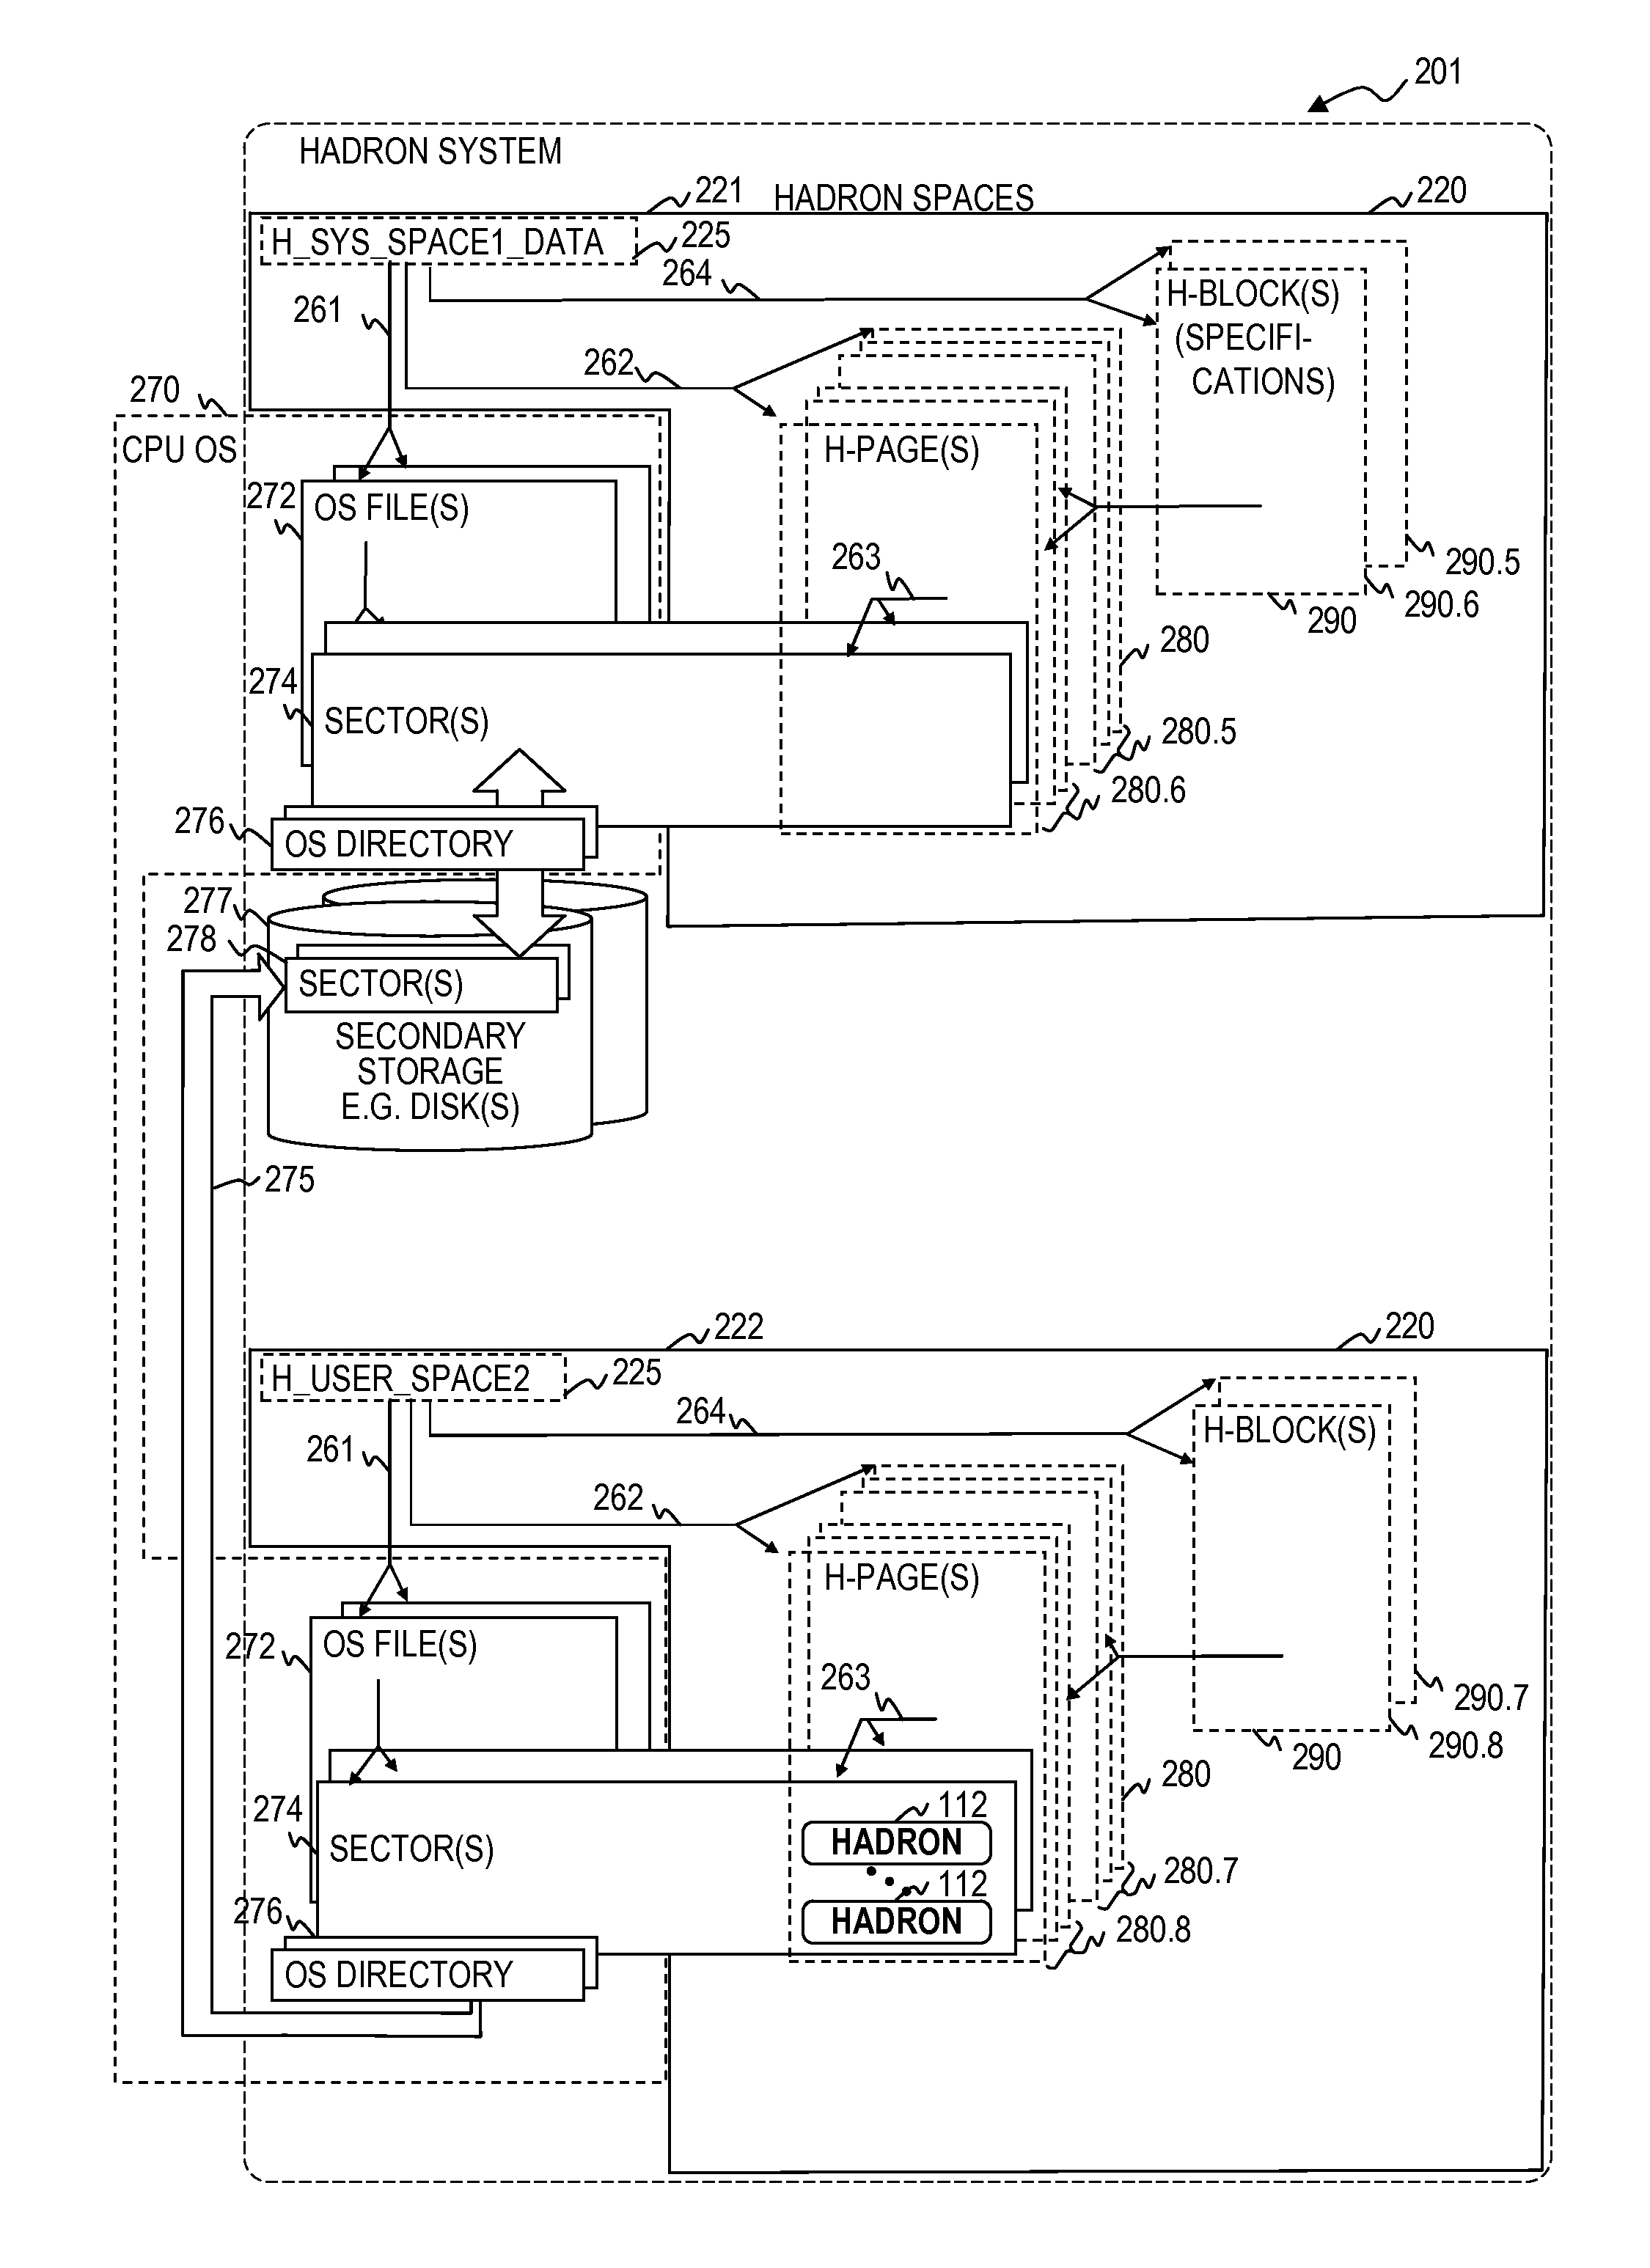 Apparatus and method for organizing, storing and retrieving data using a universal variable-length data structure